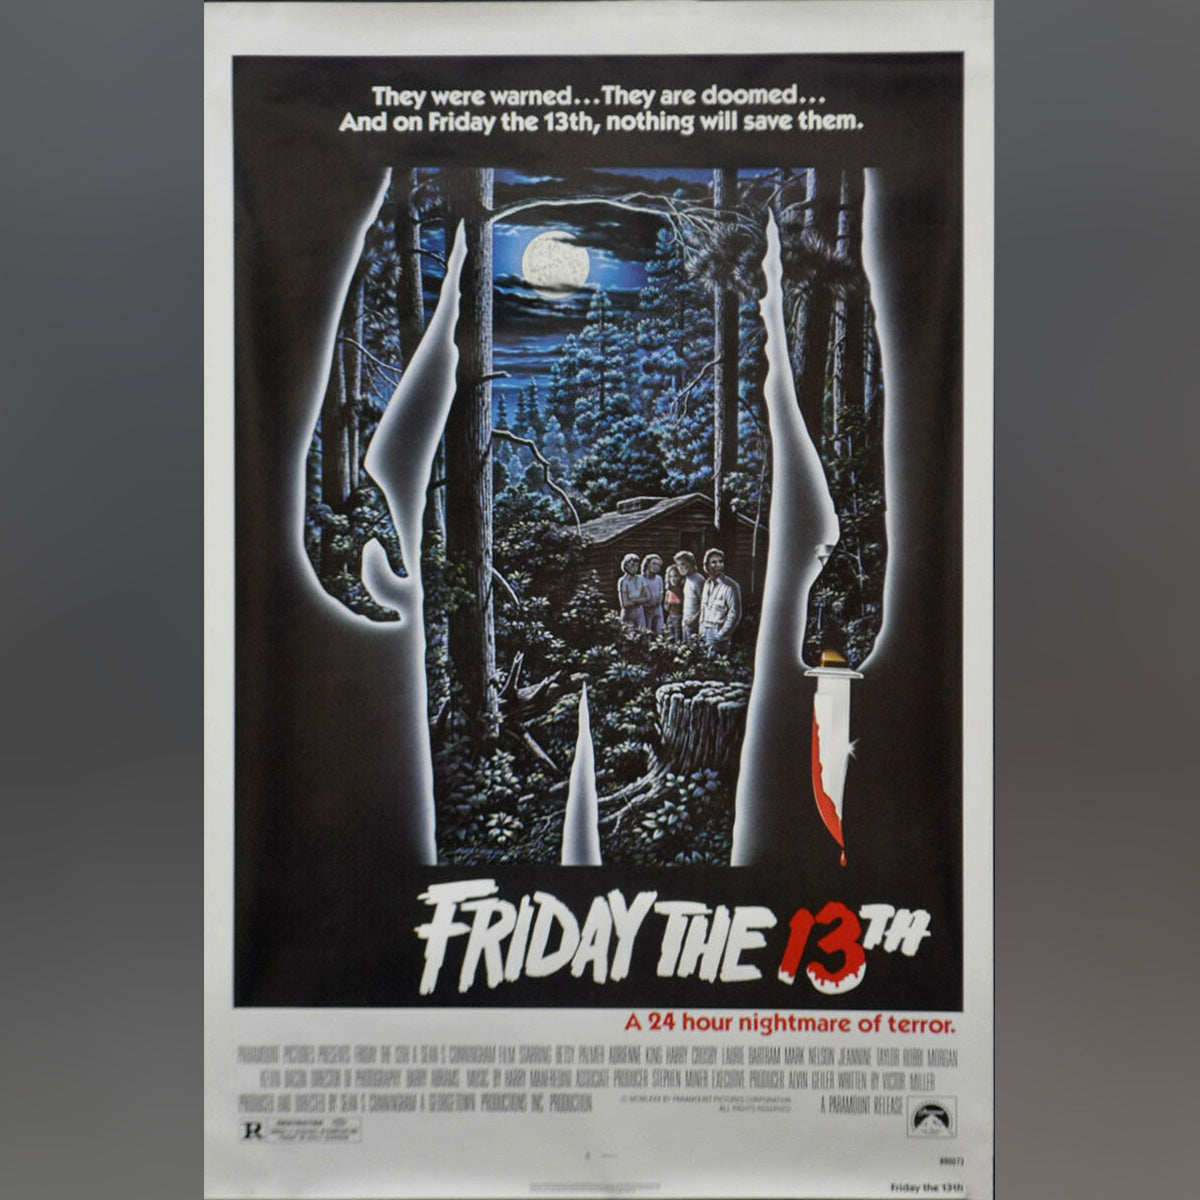 Original Movie Poster of Friday The 13th (1980)